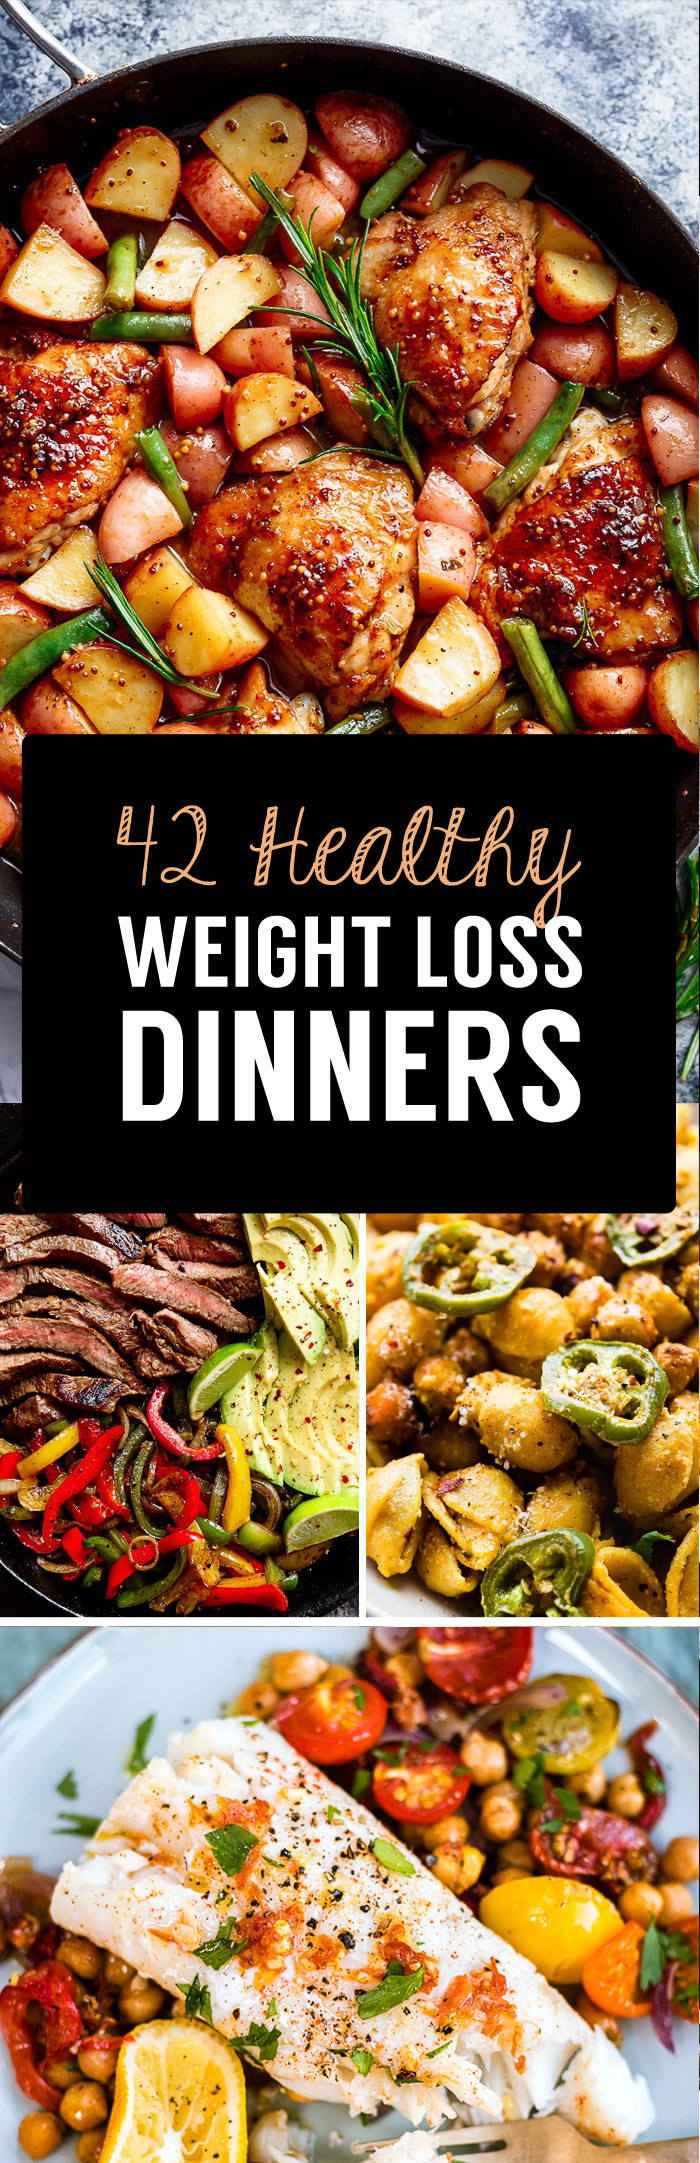 Weight Loss Meal Recipes
 42 Weight Loss Dinner Recipes That Will Help You Shrink